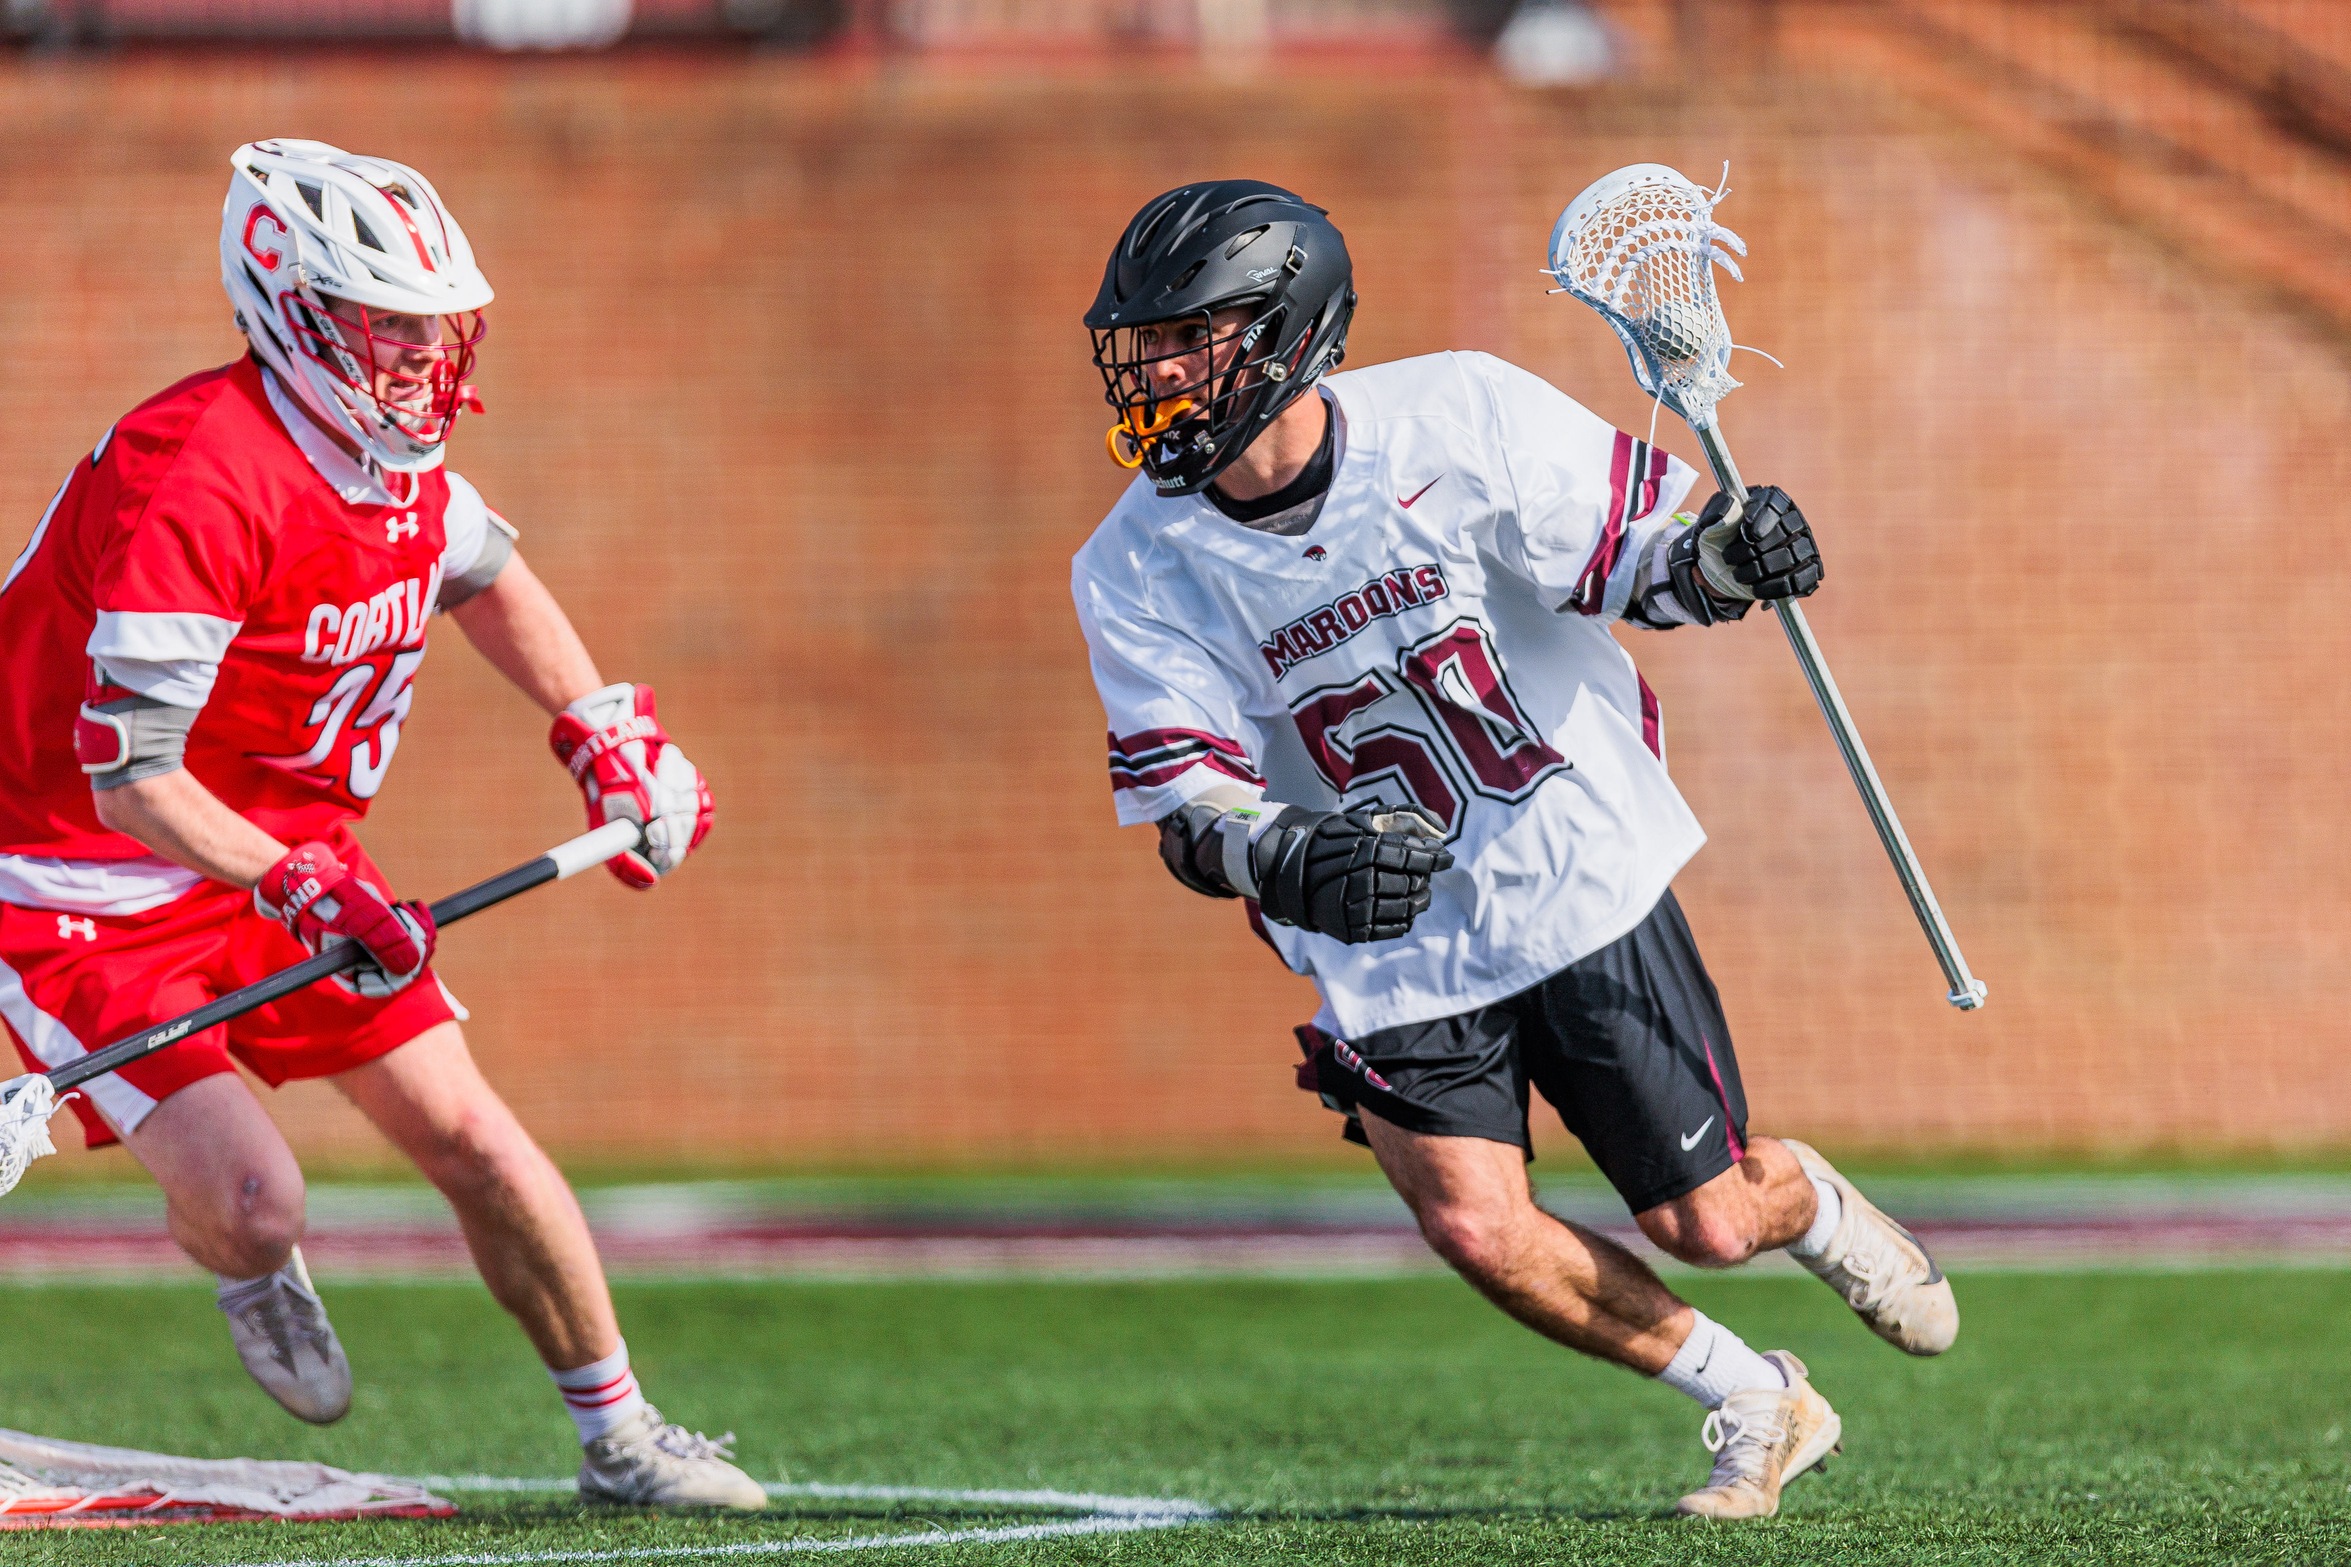 action photo of RC mlax Ethan Caldwell with the ball against a defender